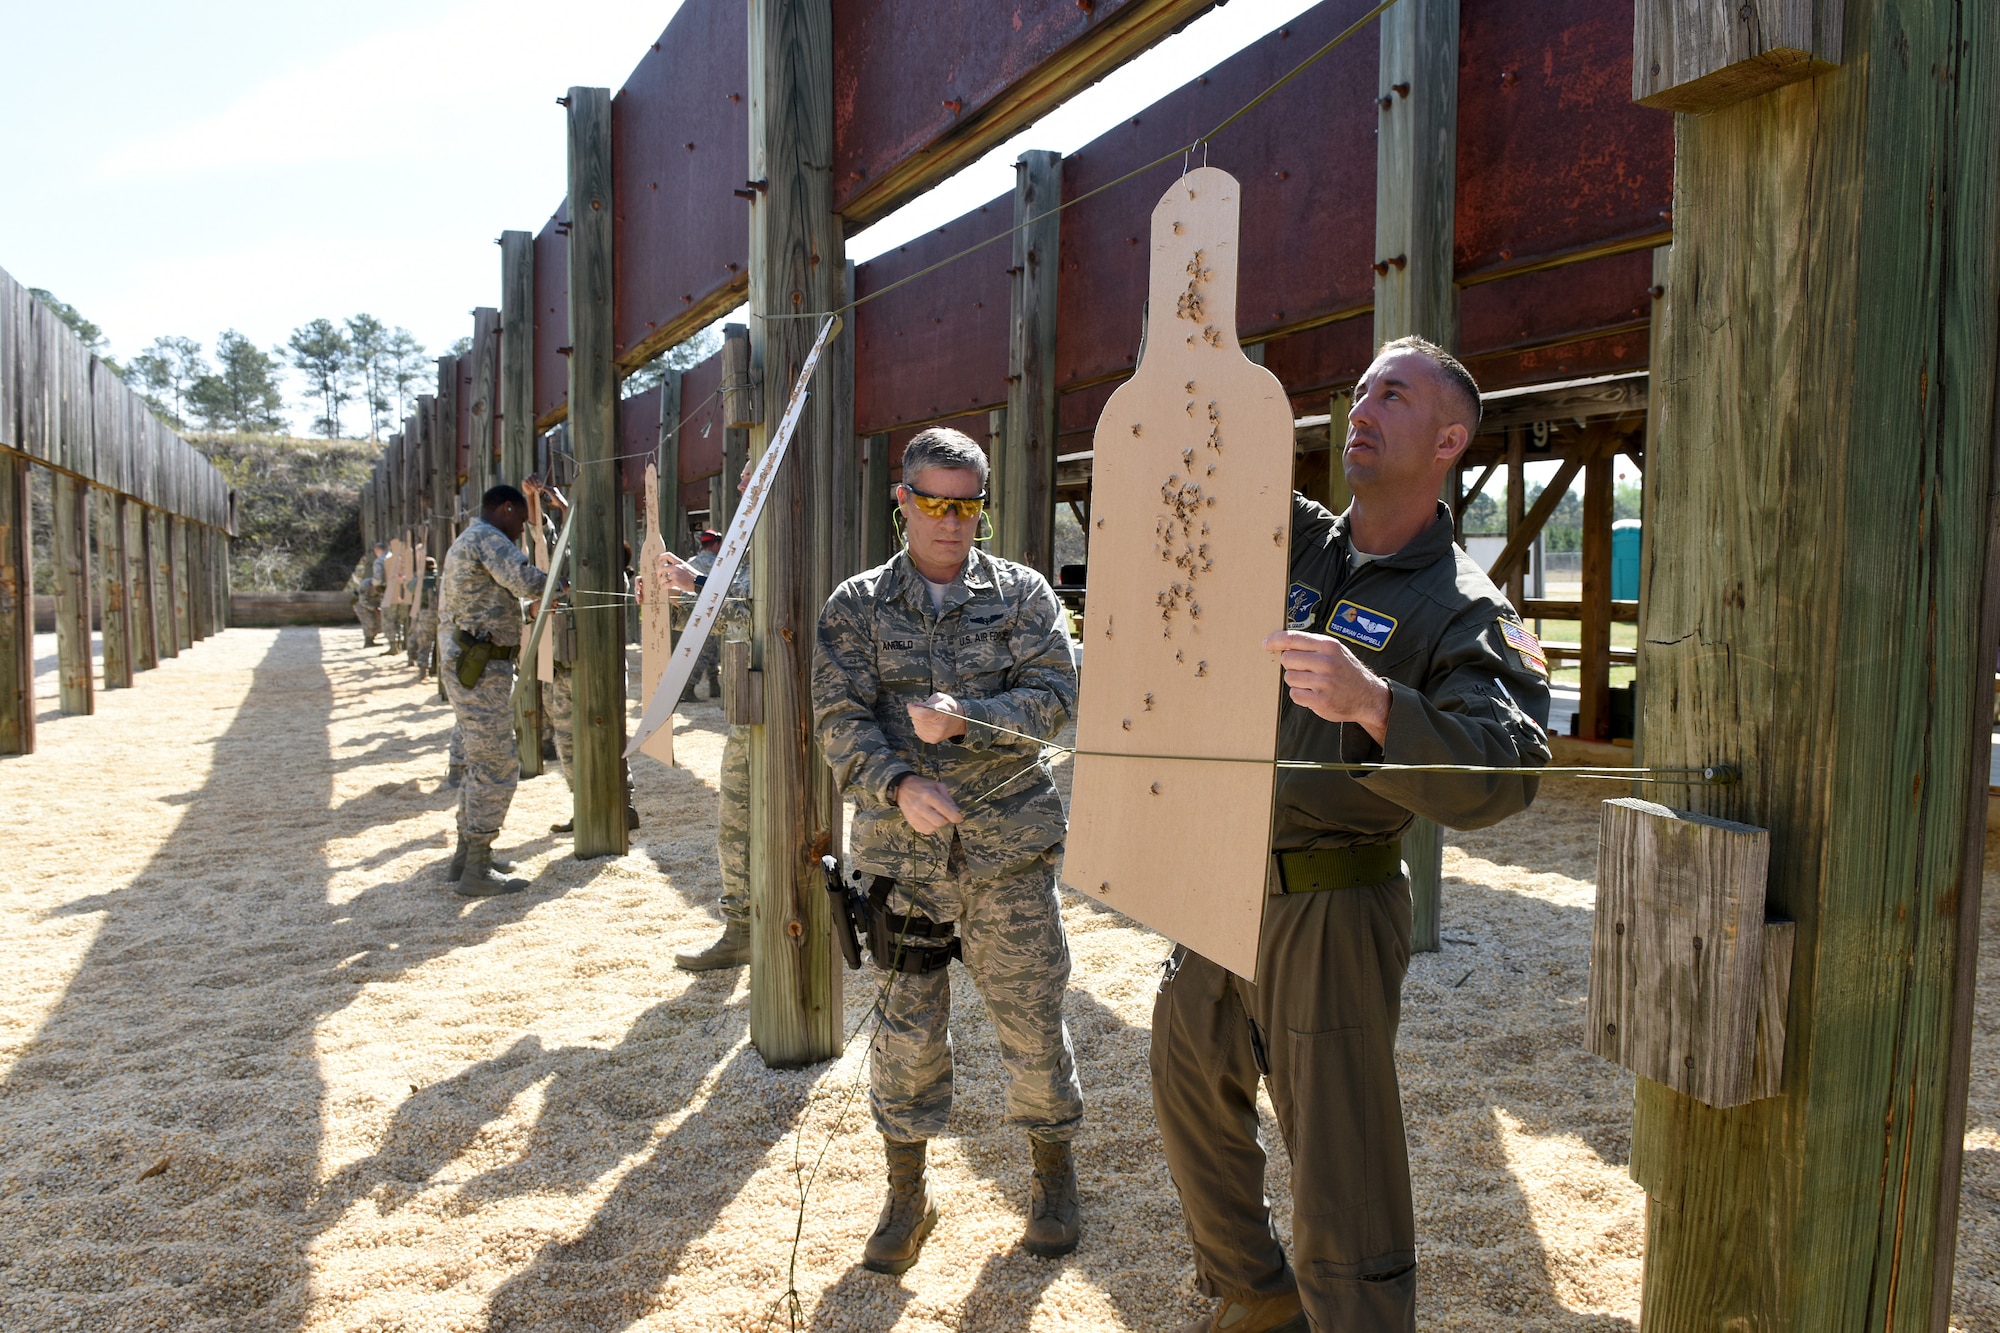 U.S. Airmen with the 156th Aeromedical Evacuation Squadron, North Carolina Air National Guard, participate in M-9 pistol training at McEntire Joint National Guard Base shooting range with South Carolina Air National Guard Combat Arms Training and Maintenance instructors from the 169th Security Forces Squadron, April 6, 2018. Swamp Fox Airmen continue to hone routine skills to meet combatant command requirements. The muscle memory that is formed by using this equipment multiple times allows Airmen the ability to focus their attention on completing the mission under austere 
conditions. (U.S. Air National Guard photo by Master Sgt. Caycee Watson)